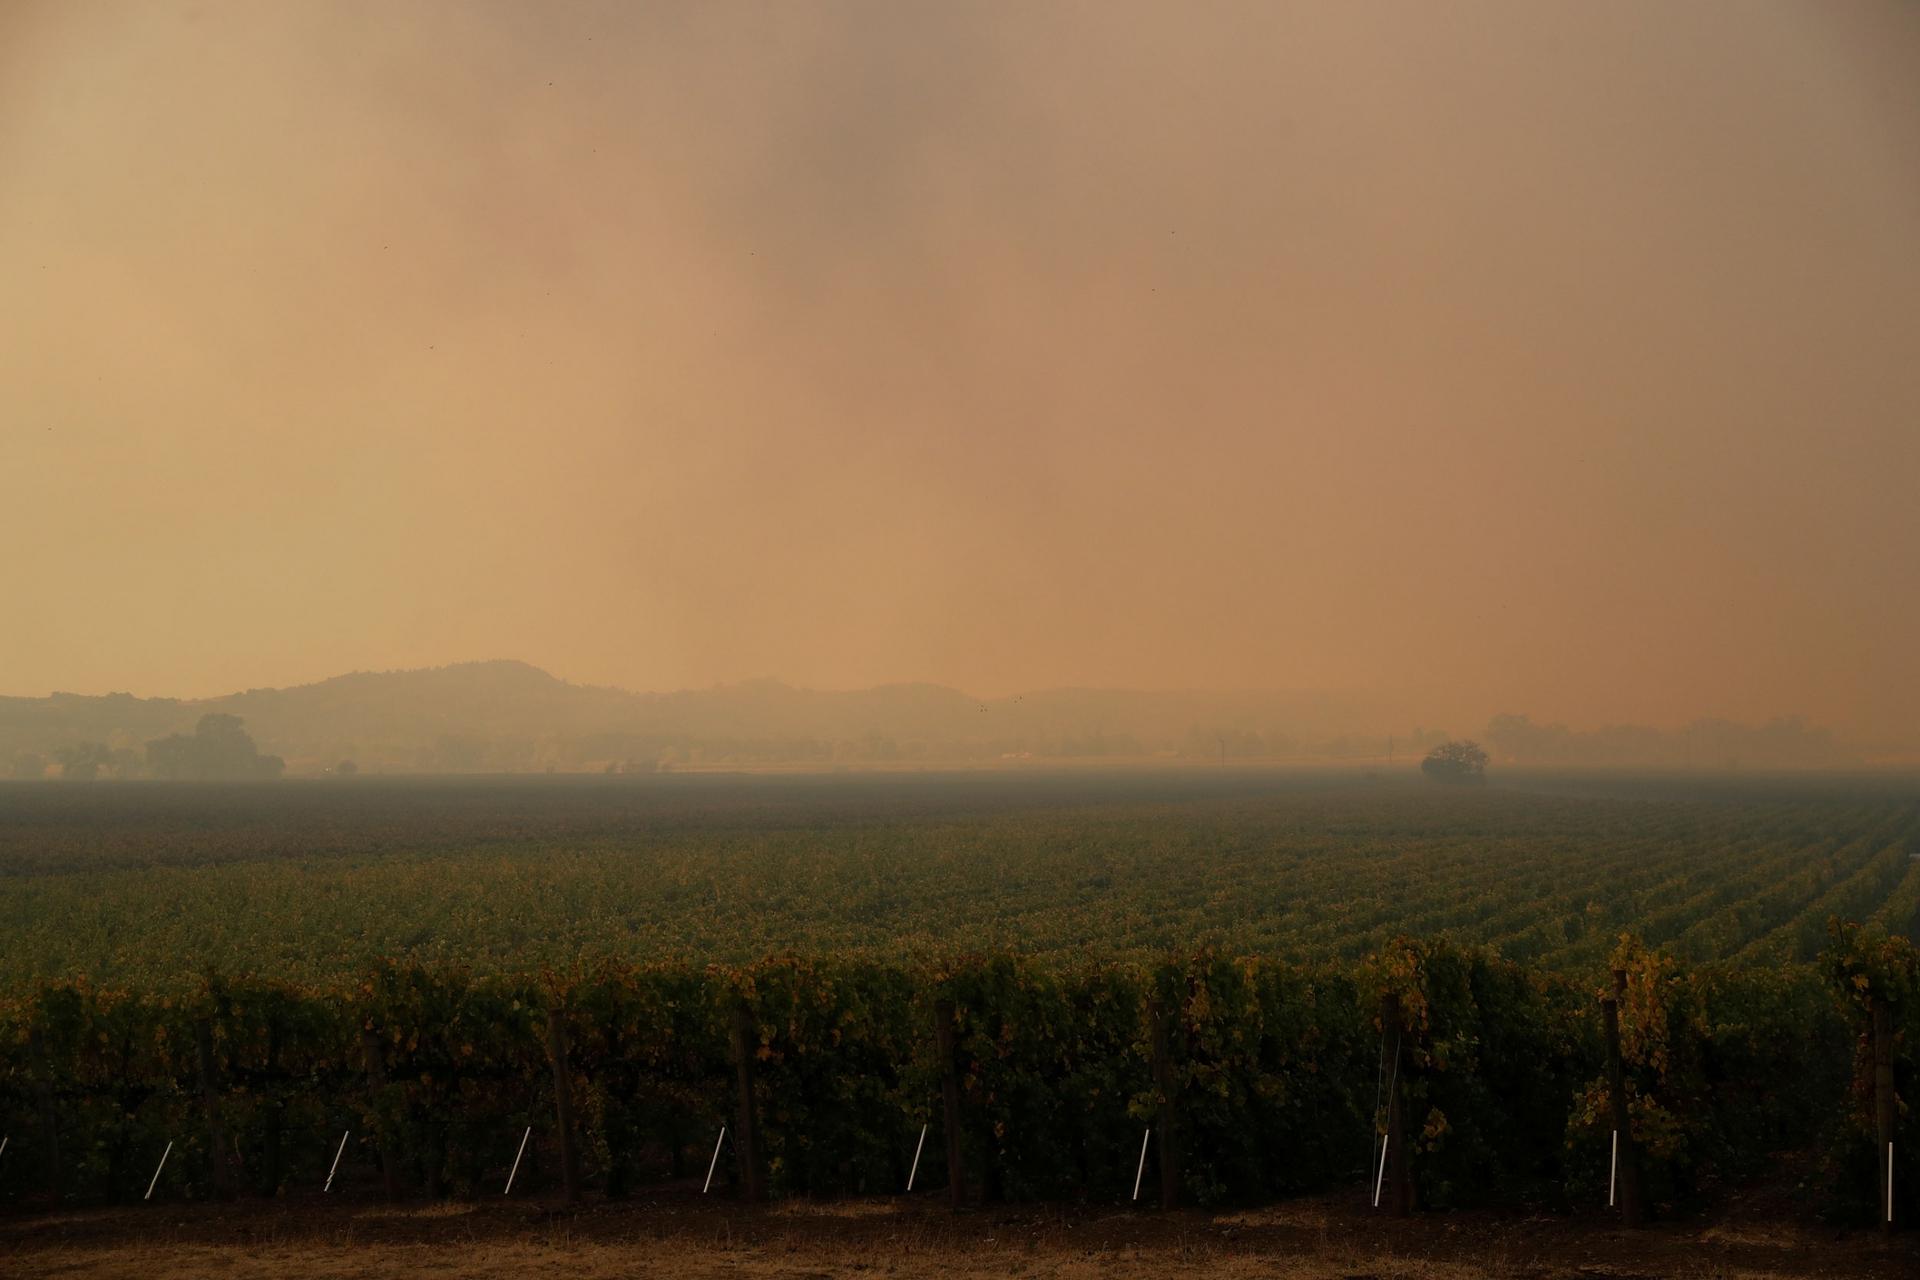 A vineyard is shown with mountains off in the distance with smoke clouding the entire sky.